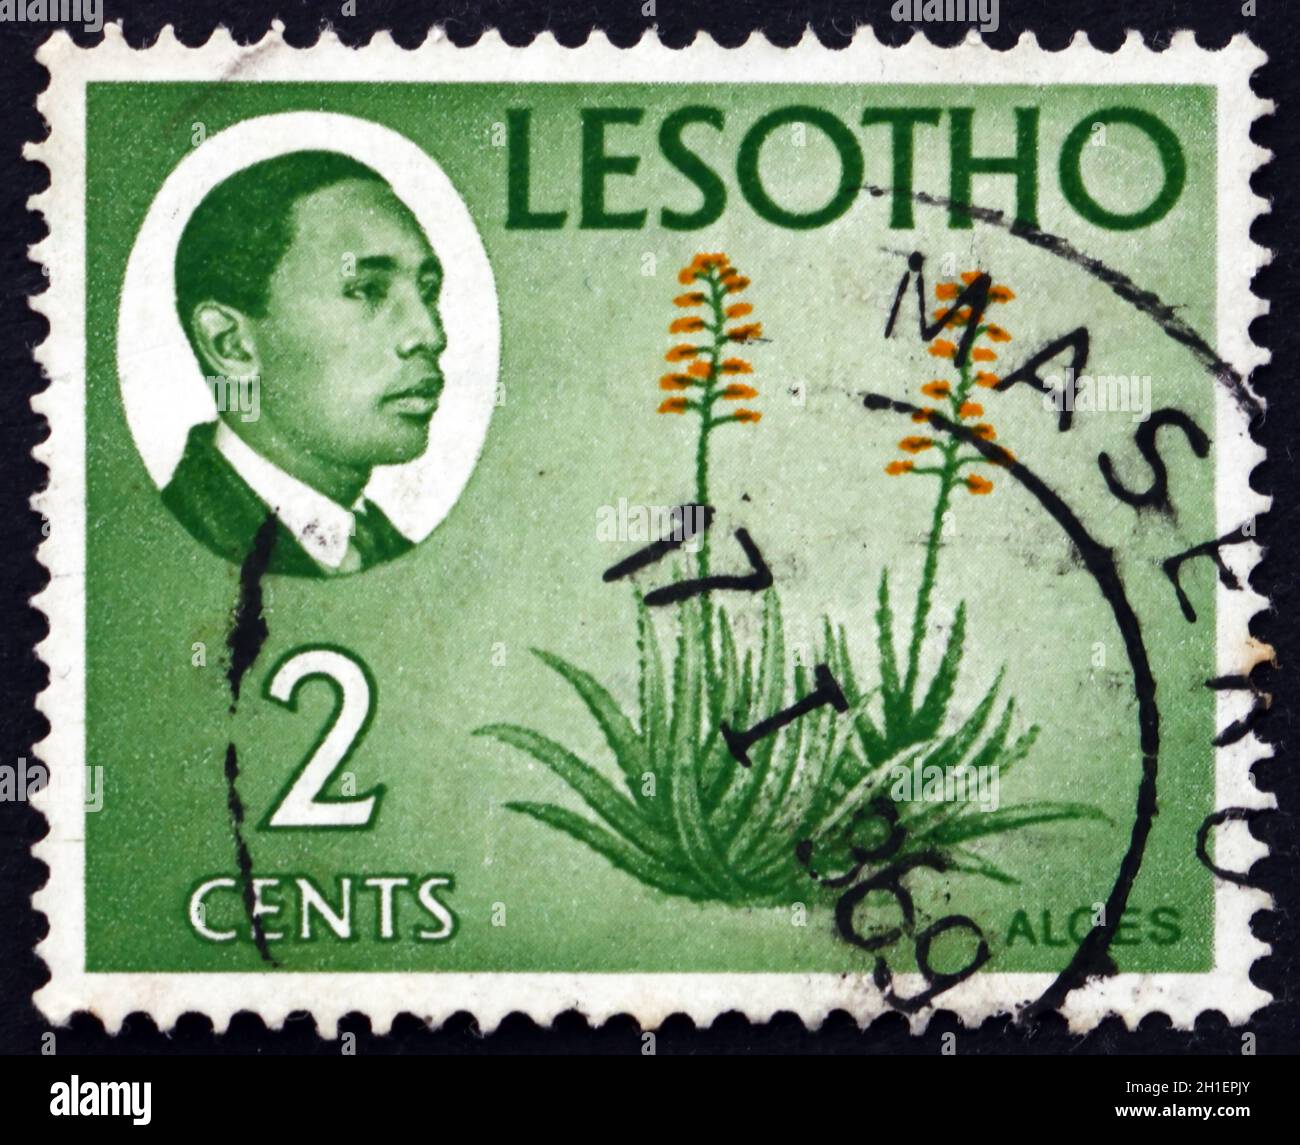 LESOTHO - CIRCA 1967: a stamp printed in the Lesotho shows King Moshoeshoe II and aloes, circa 1967 Stock Photo